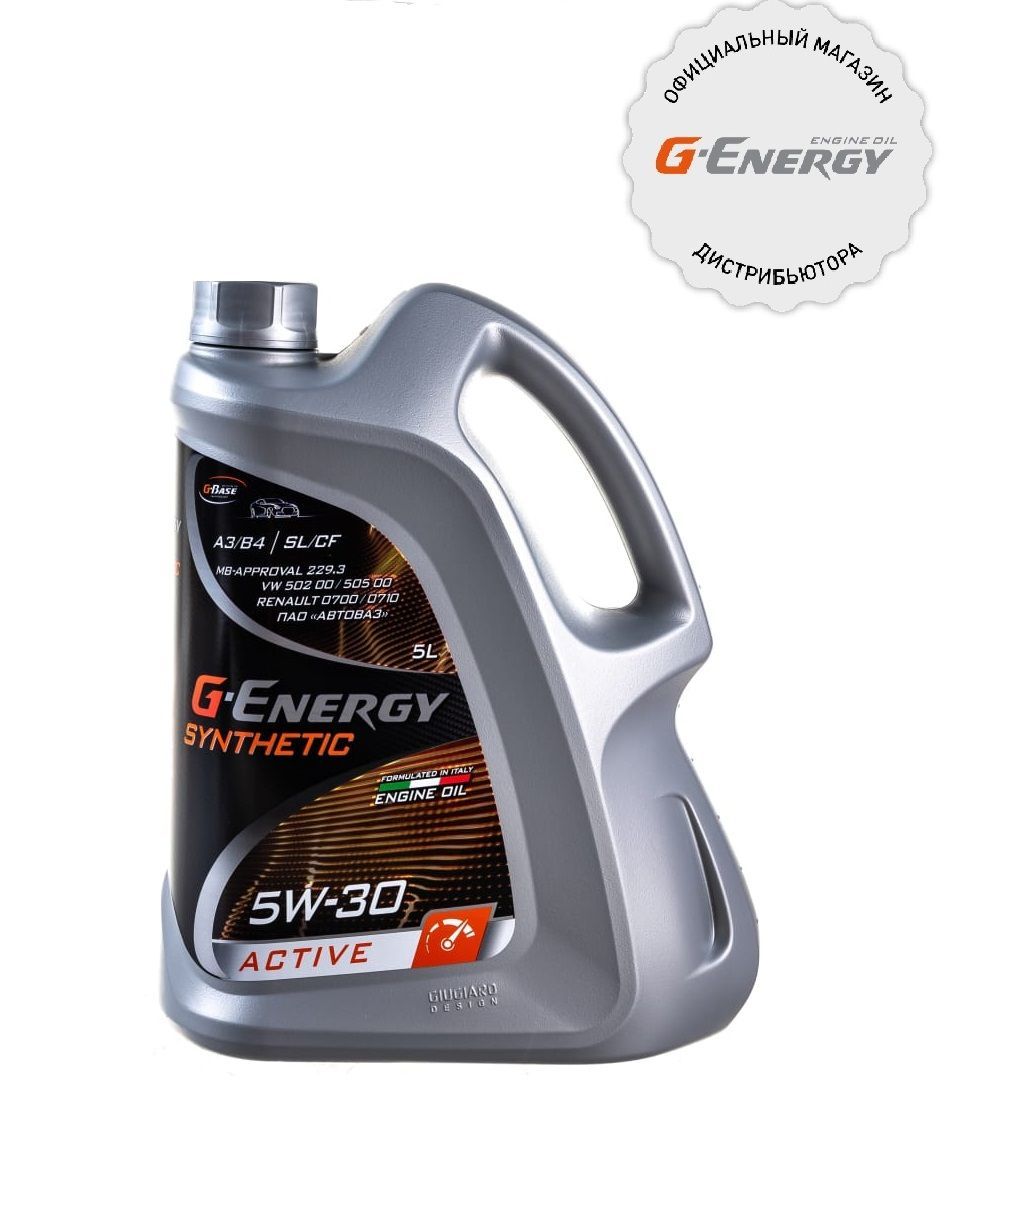 Масло g energy synthetic 5w 30. Масло g-Energy Syntetic Activ 5w30. Масло g Energy Synthetic Active 5w30. G-Energy Synthetic far East 5w-30. Масло g-Energy 5w30 c3.